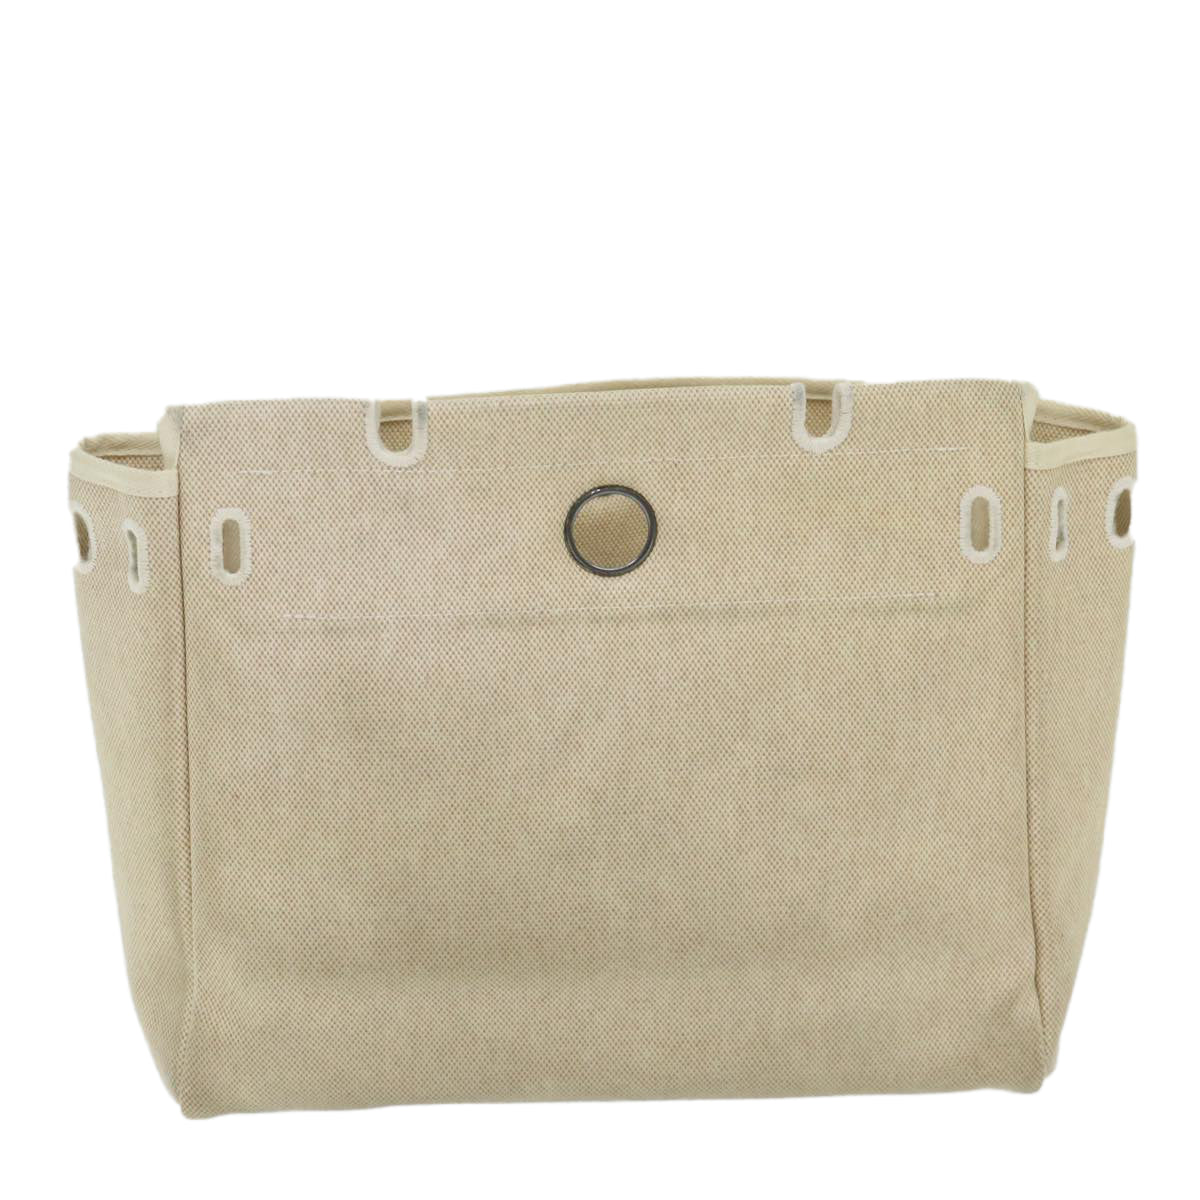 HERMES Her Bag PM Hand Bag Coated Canvas Beige Auth am5622 - 0